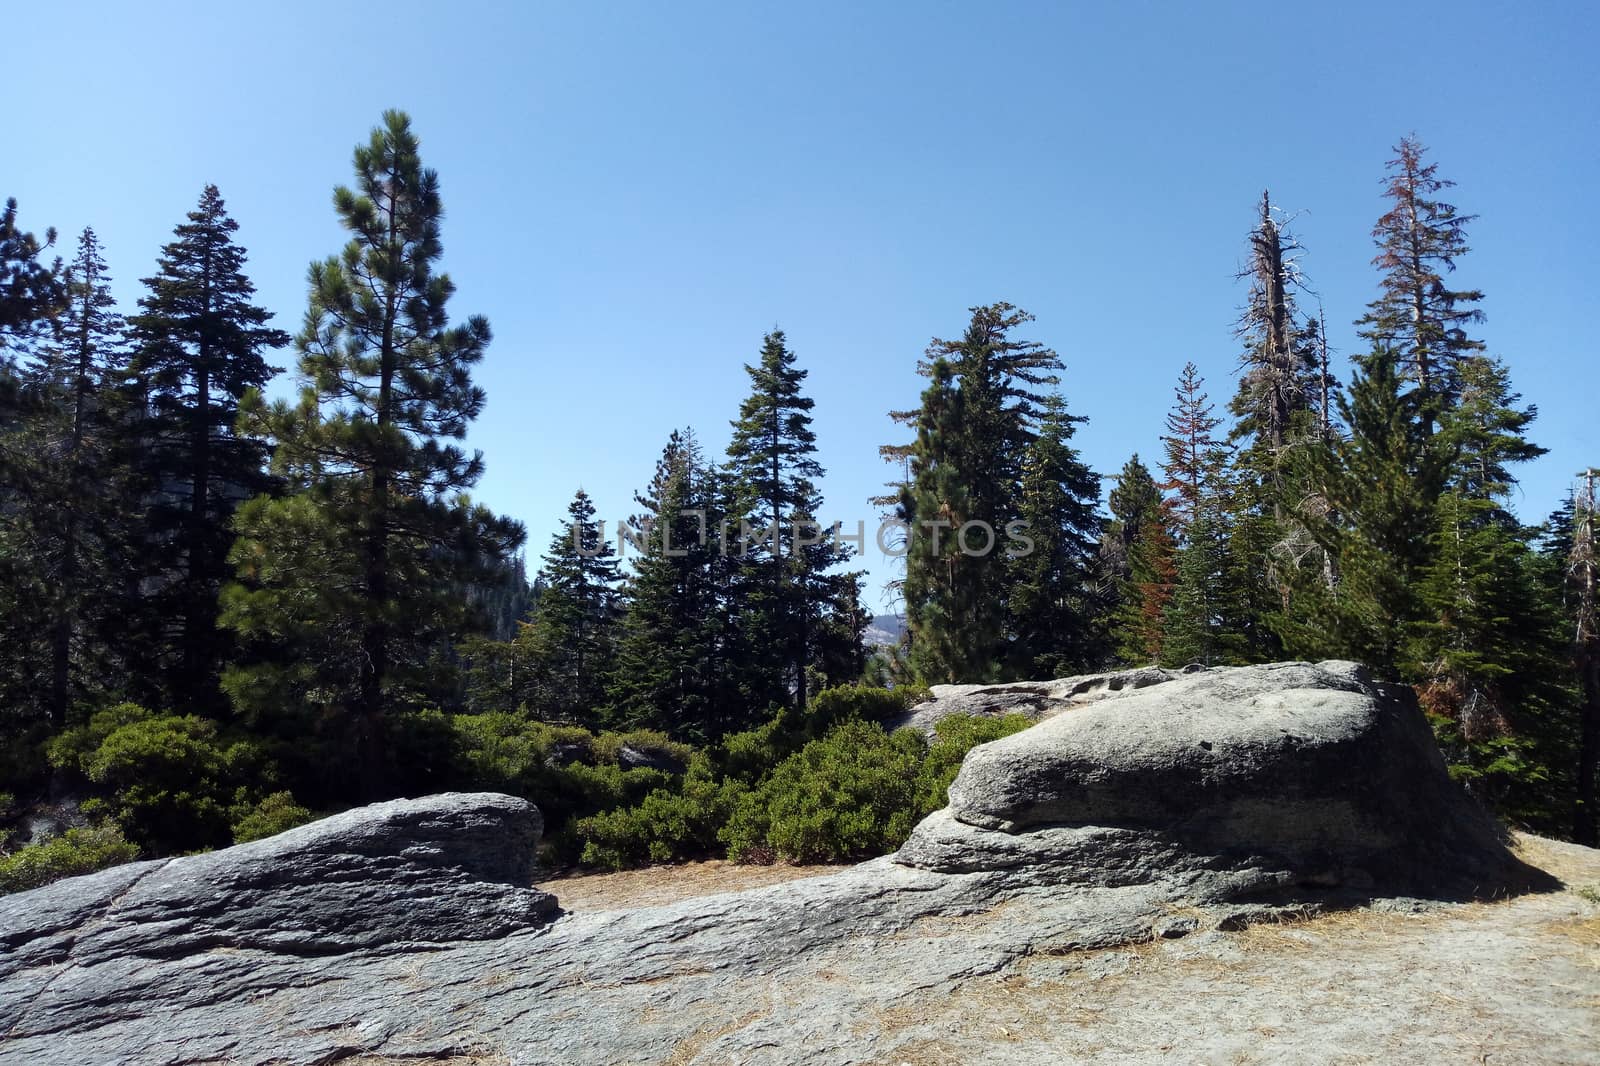 View of the forest in Yosemite Park on a sunny day